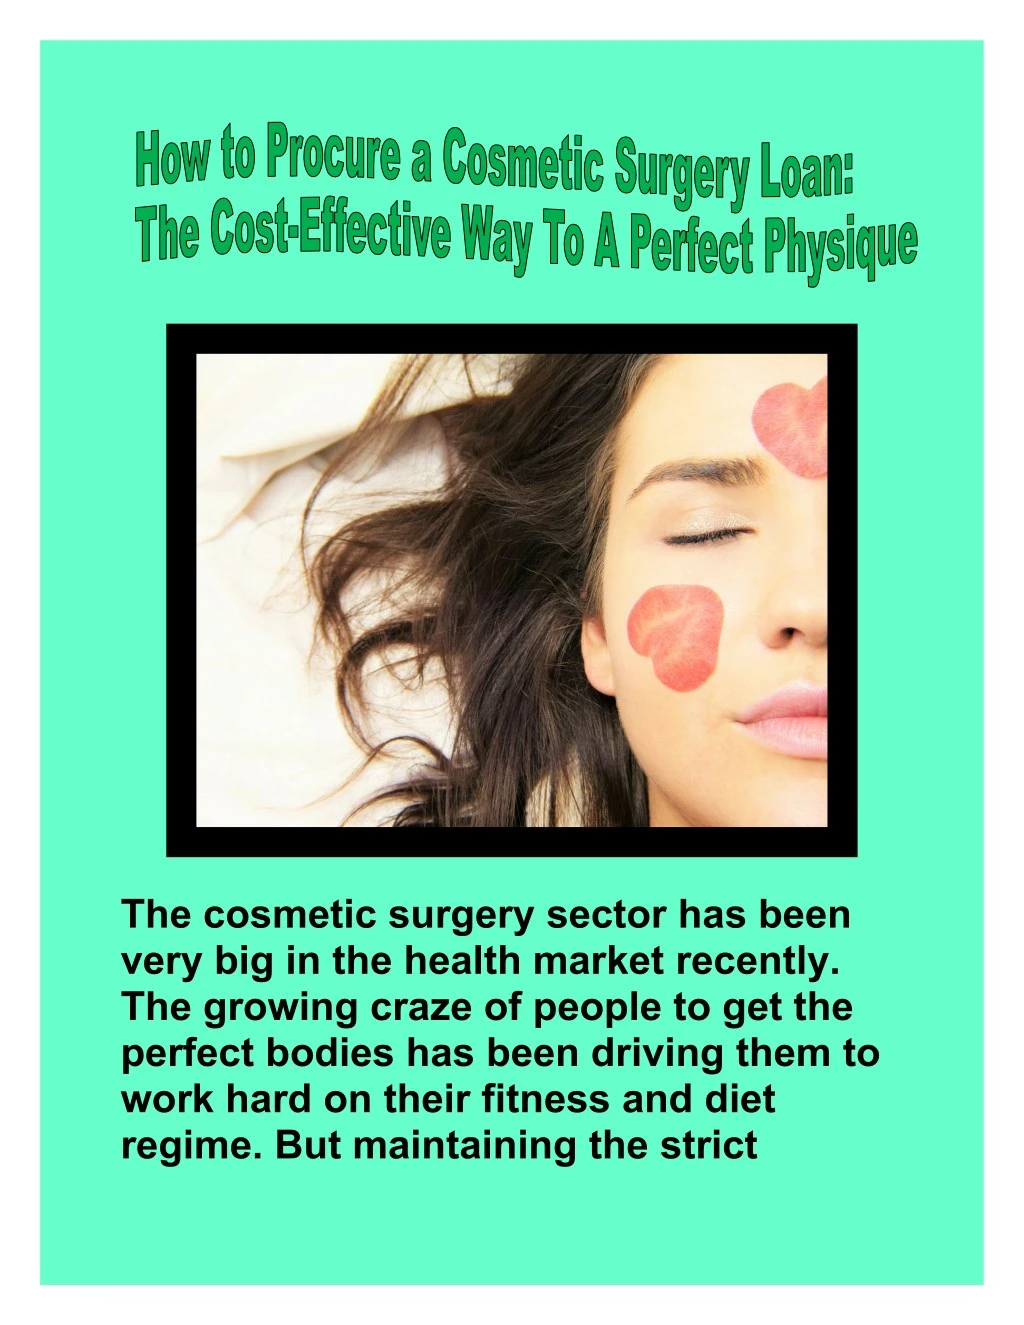 the cosmetic surgery sector has been very